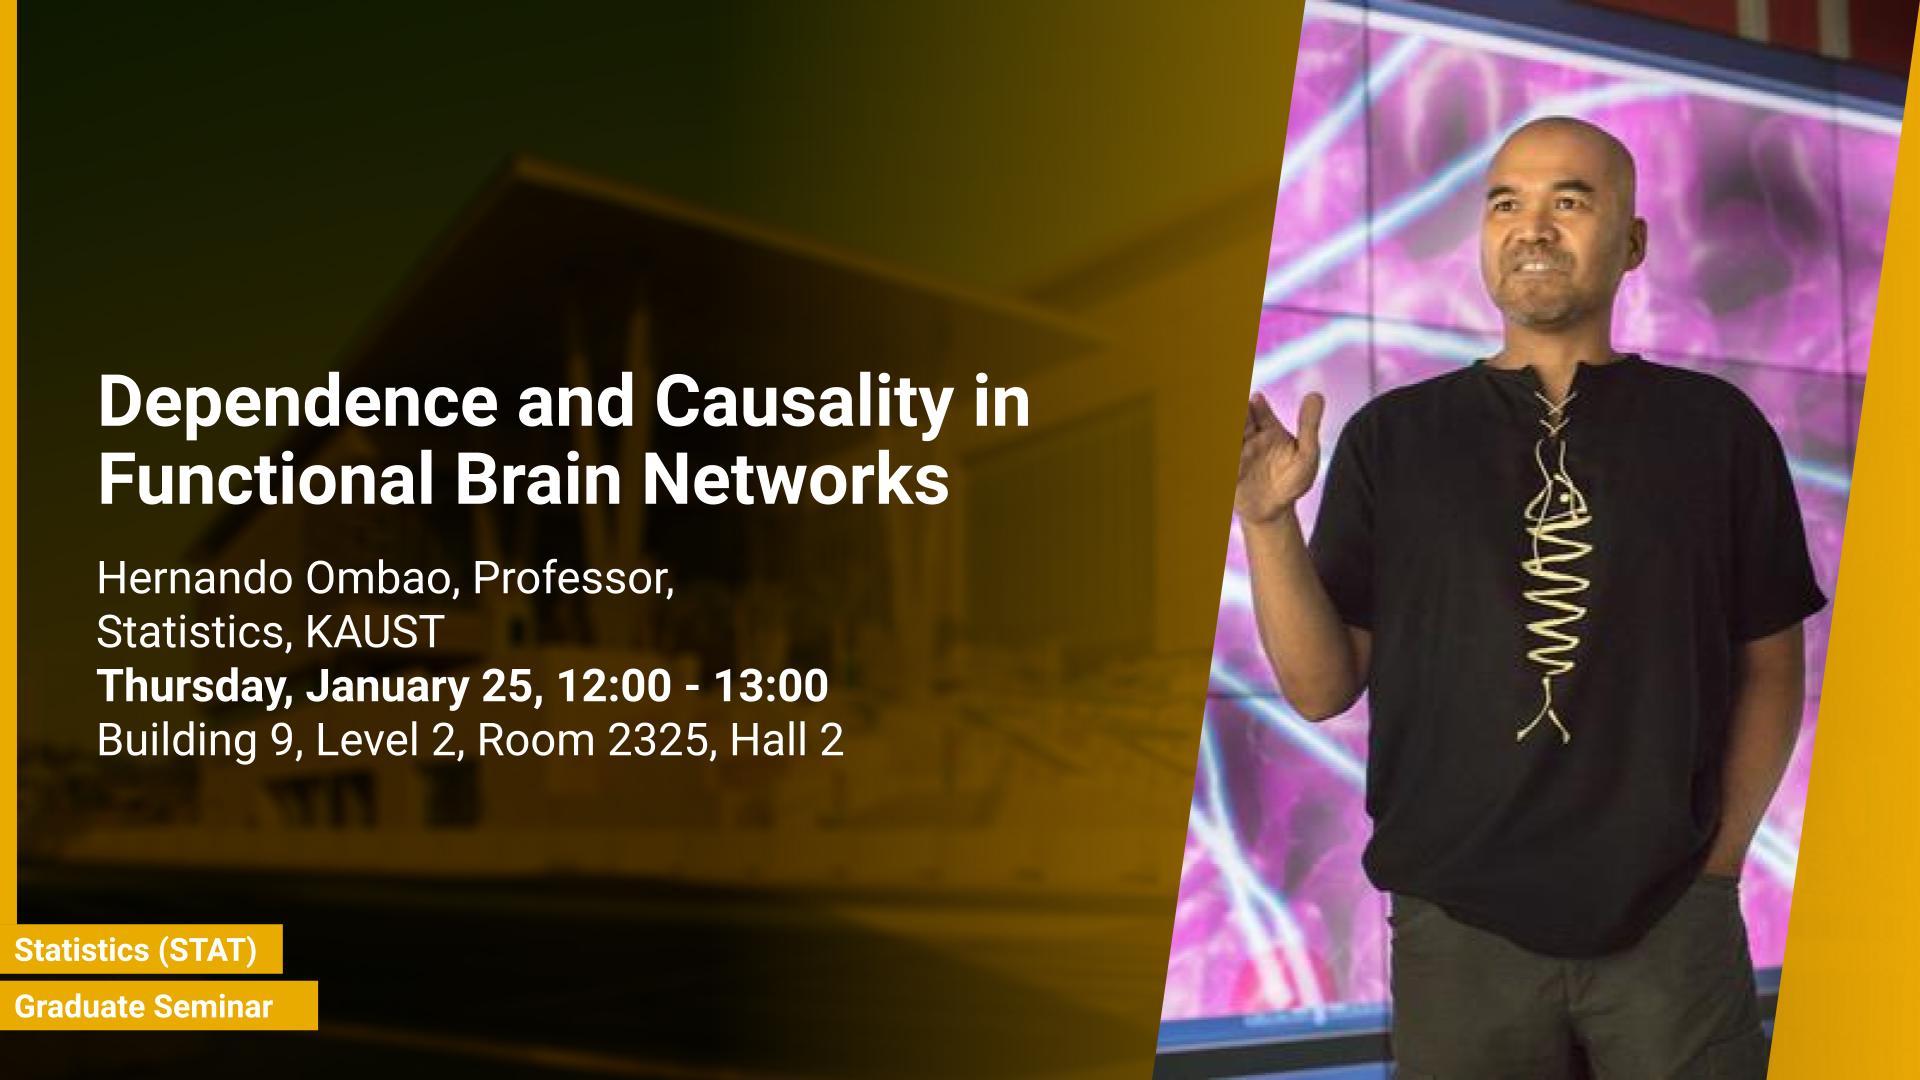 KAUST-CEMSE-AMCS-STAT-Graduate -Seminar-Dependence and Causality in Functional Brain Networks